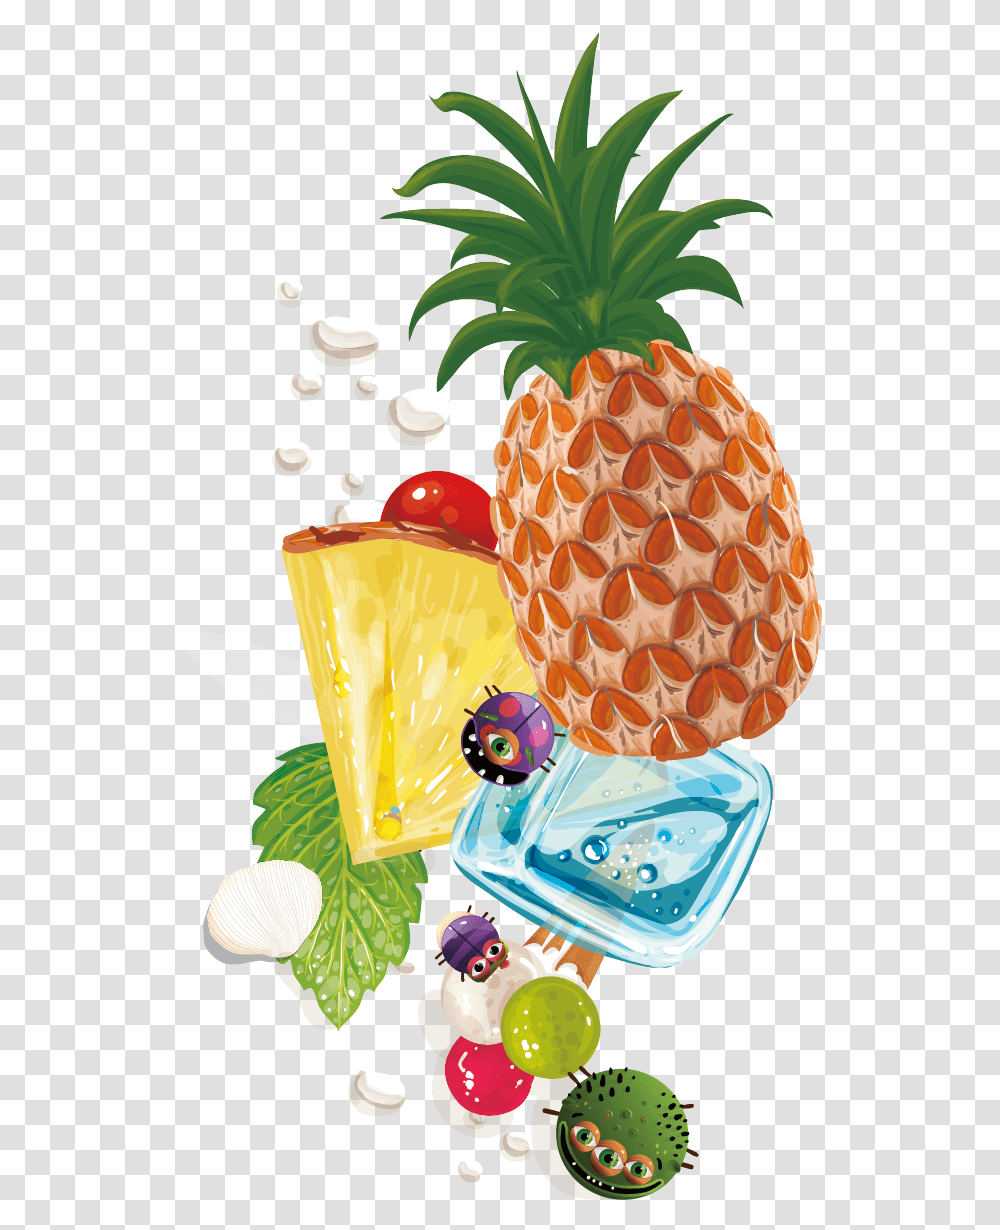 Pineapple Fruit Background Vector Material Pineapple, Plant Transparent Png